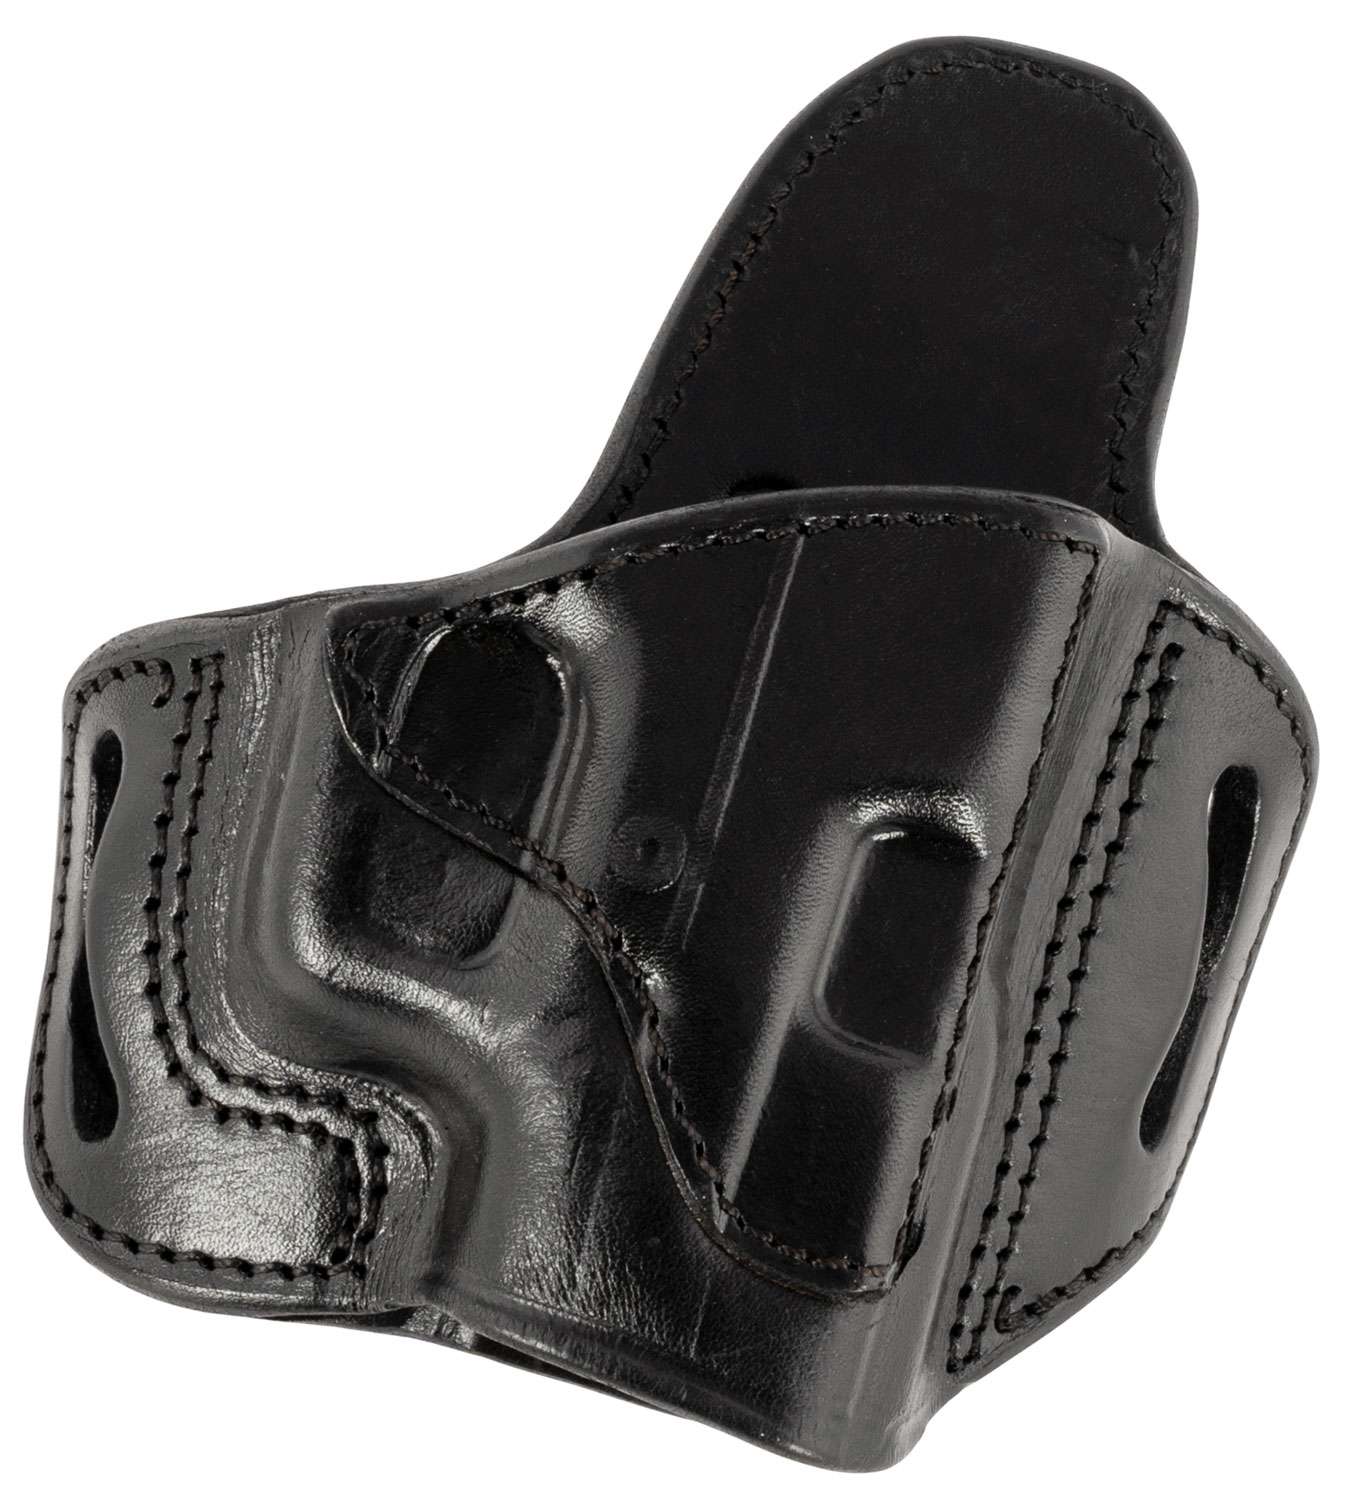 Tagua TX 1836 Bh2 Quick Draw Belt Holster Fits Glock 43 RH Black Leather for sale online 